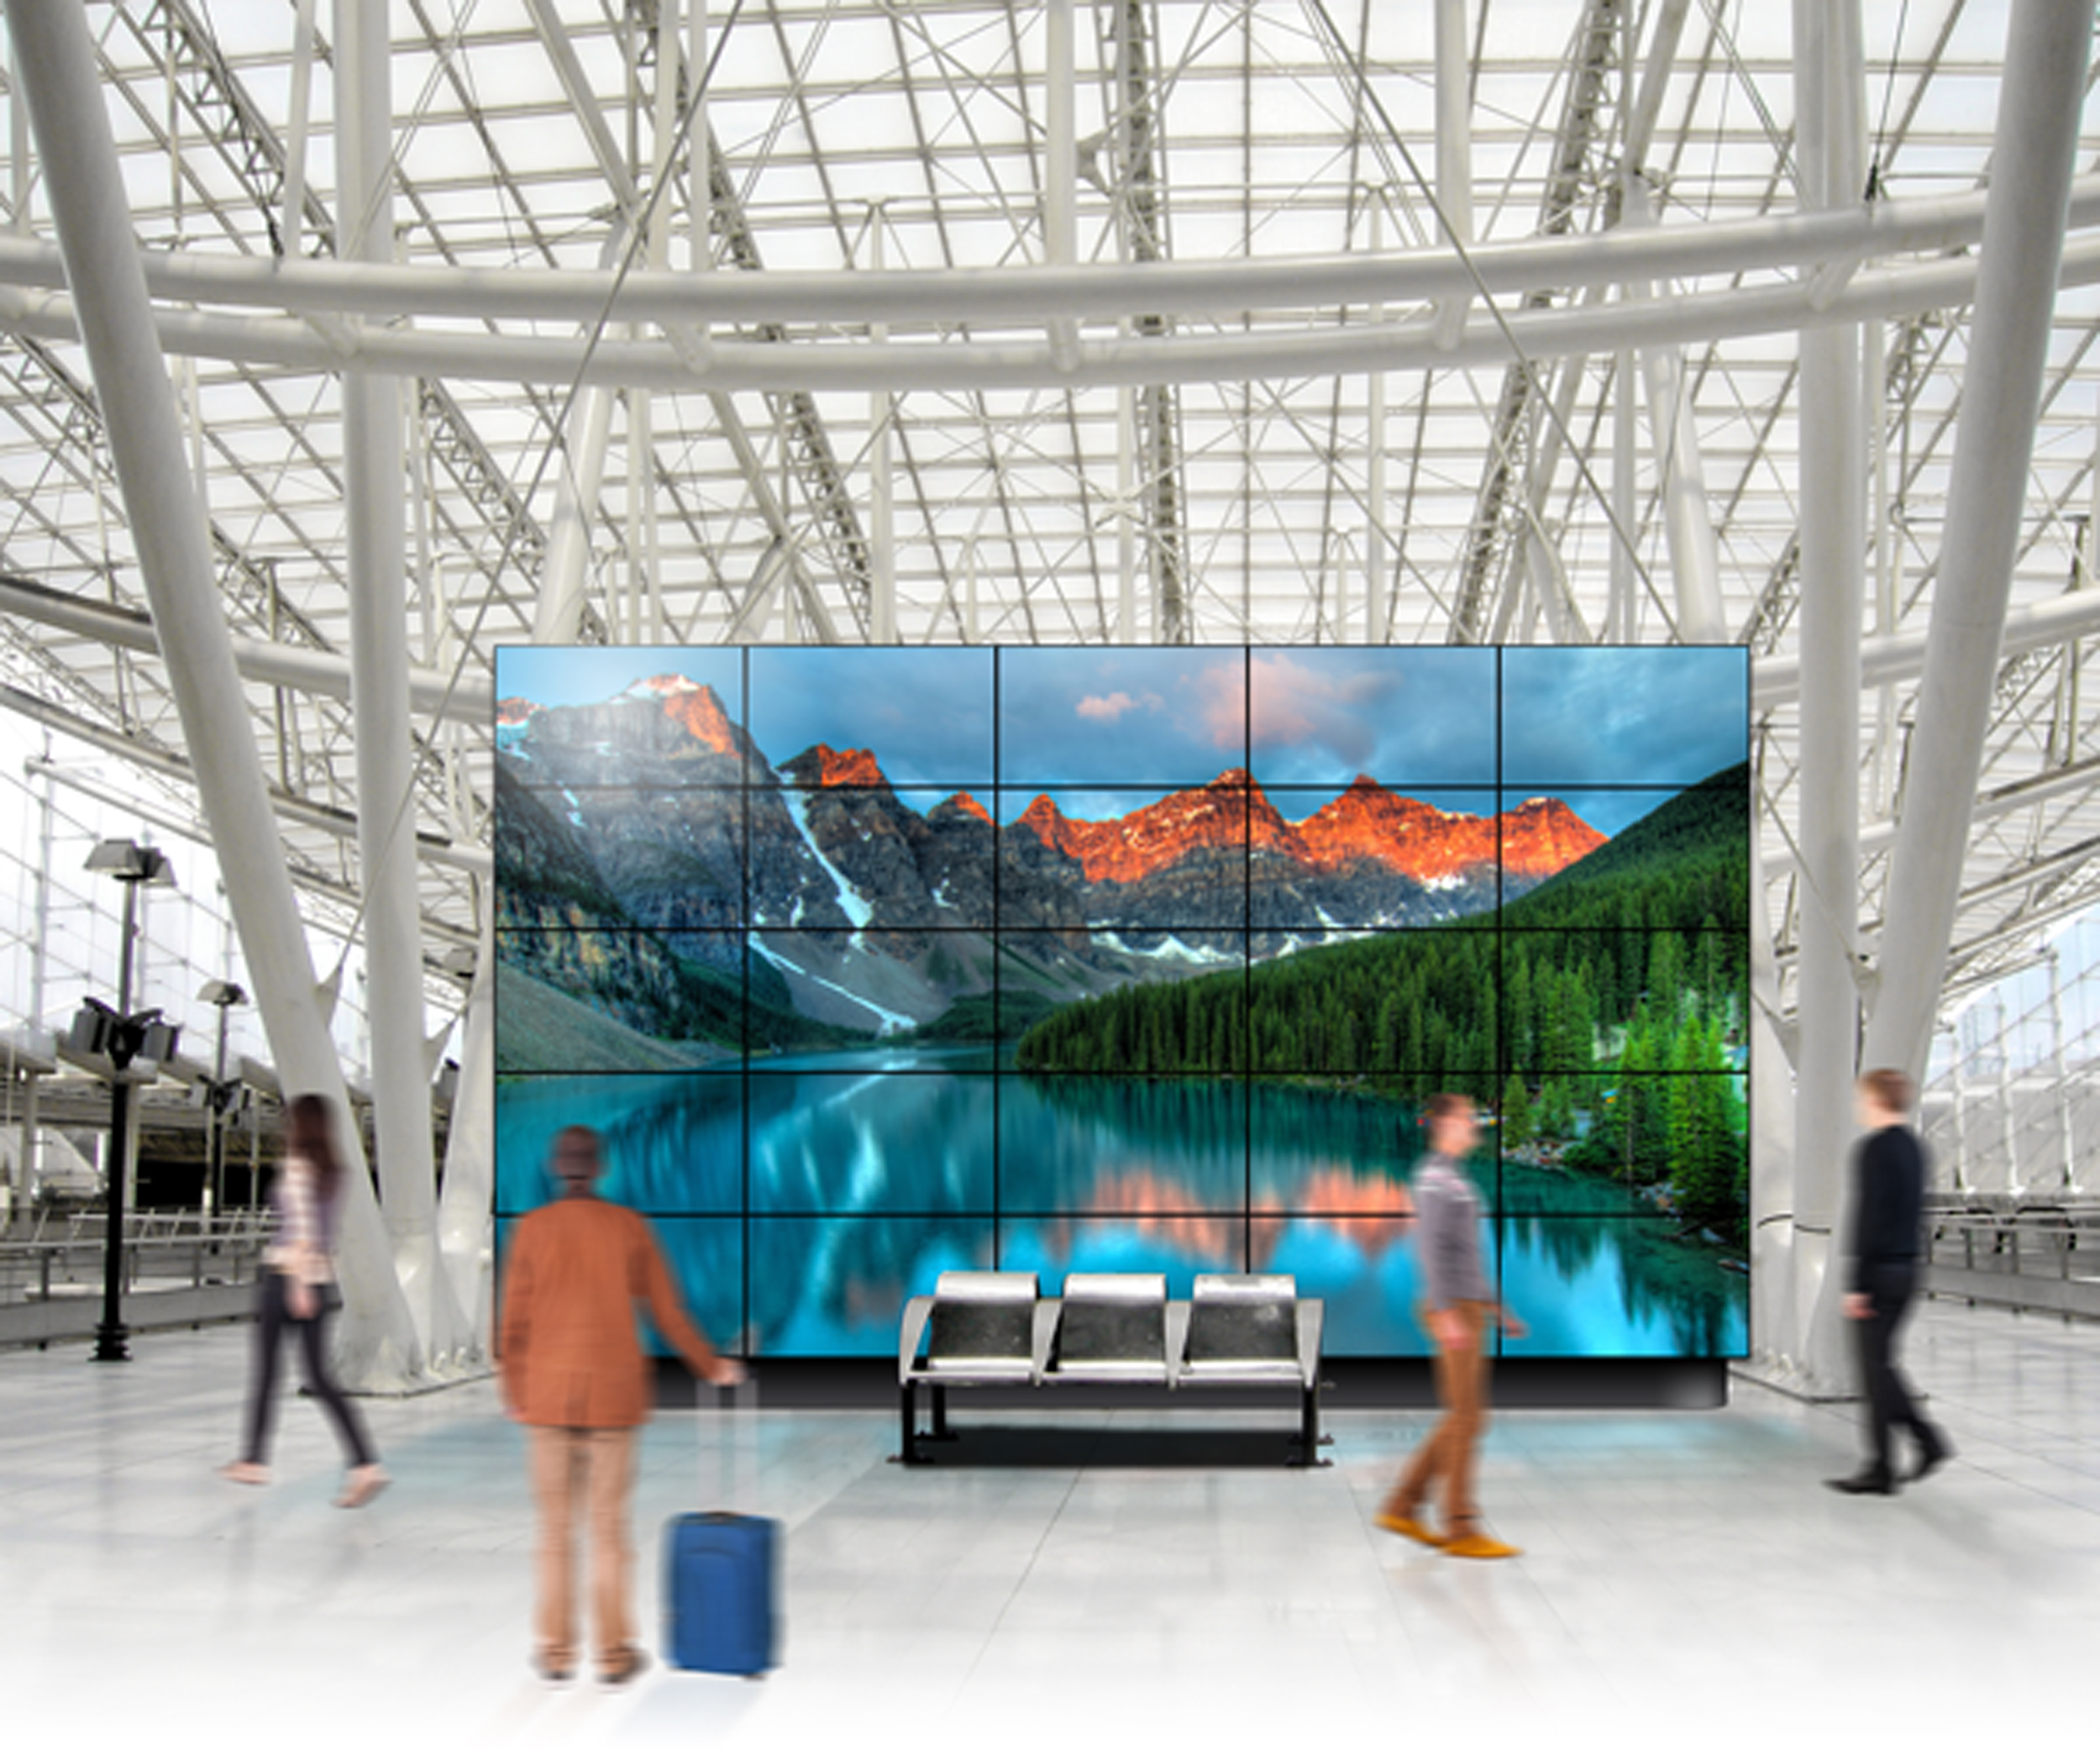 Keywest Technology showcased a new OEM technology partner at Digital Signage Expo in Las Vegas this spring. The Userful™ video wall technology provides Keywest the ability to offer clients epic-sized video walls with up to 100 displays in any configuration using a single Breeze™ media player.